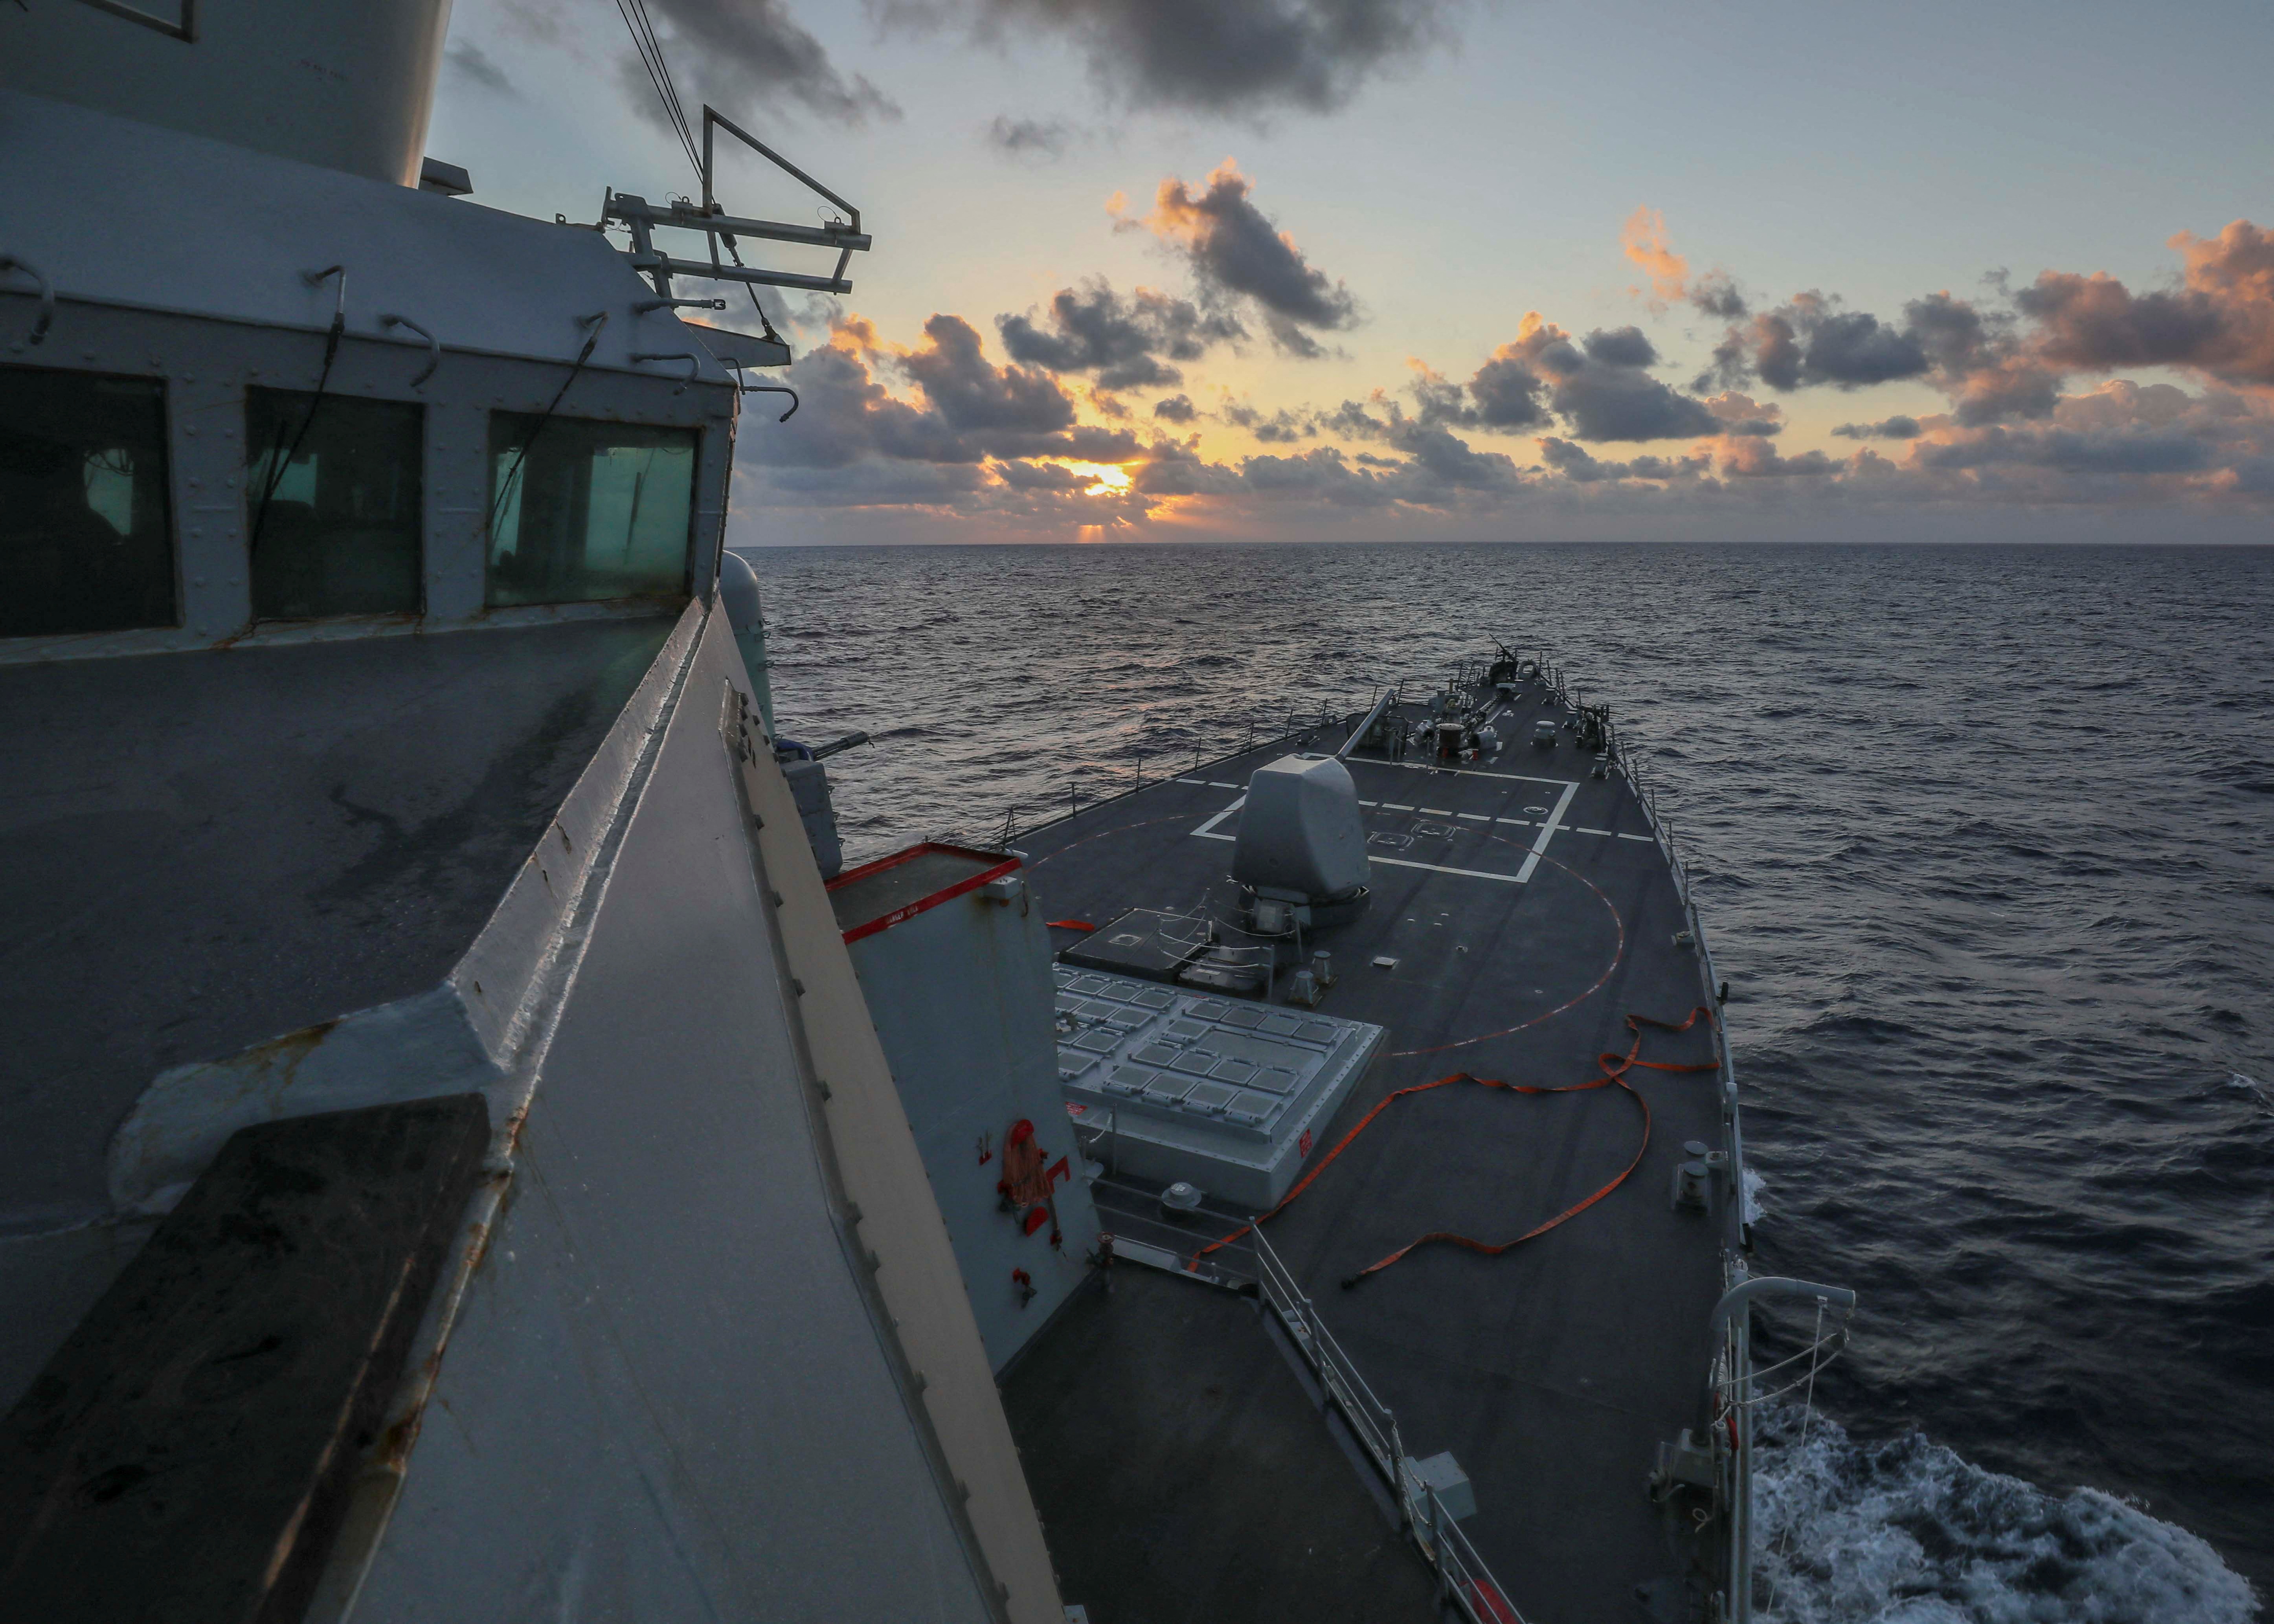 Handout image of Arleigh Burke-class guided-missile destroyer USS Benfold